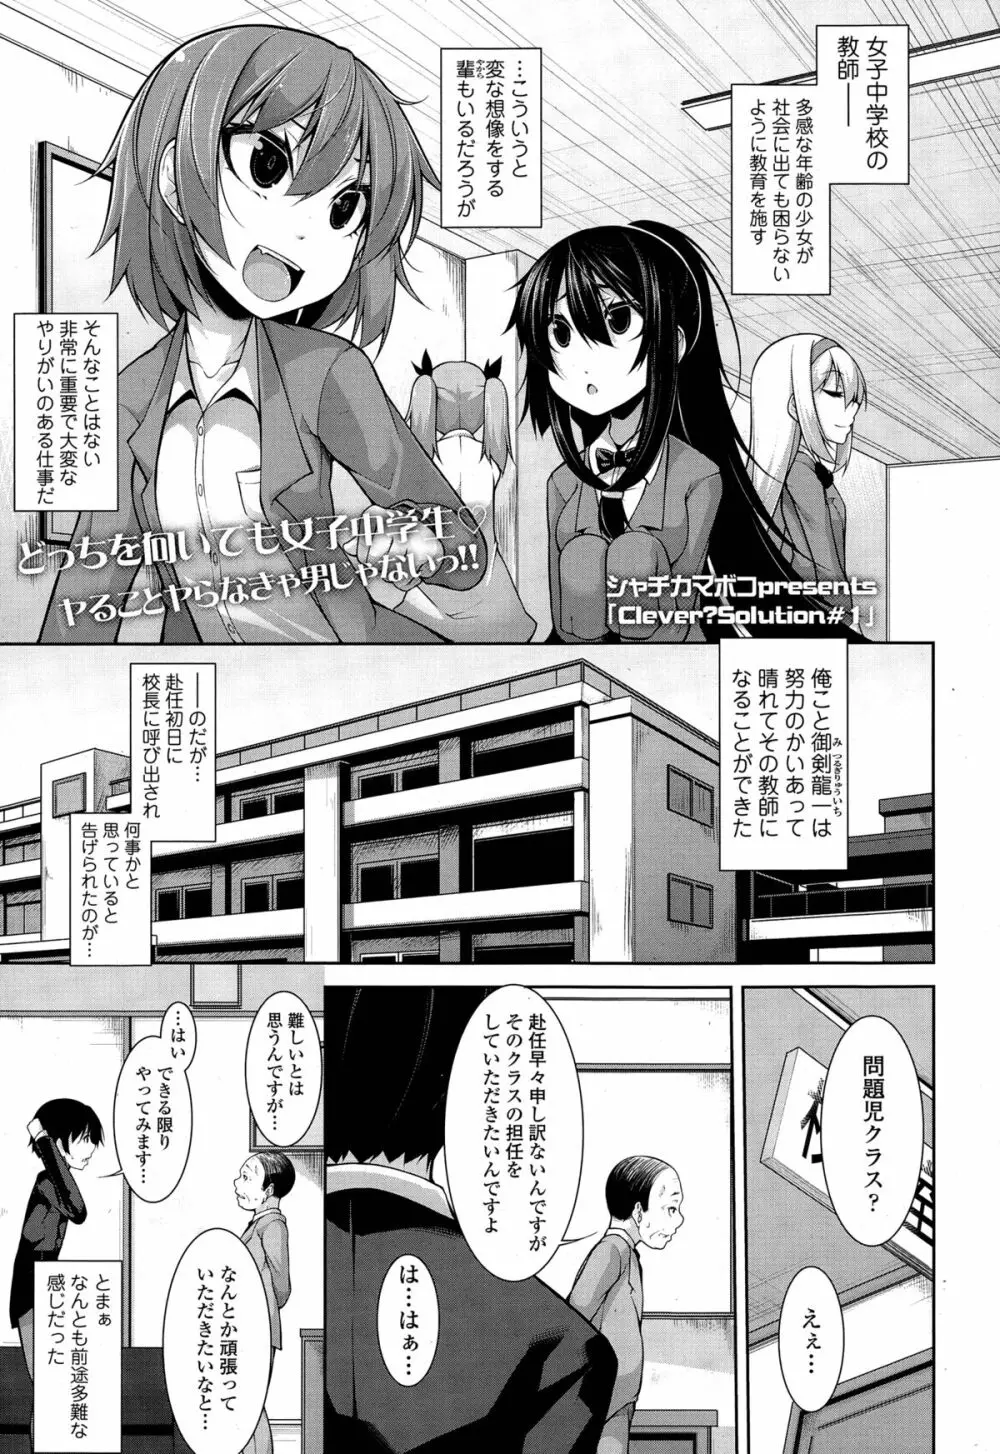 Clever? Solution 第1-3話 Page.1